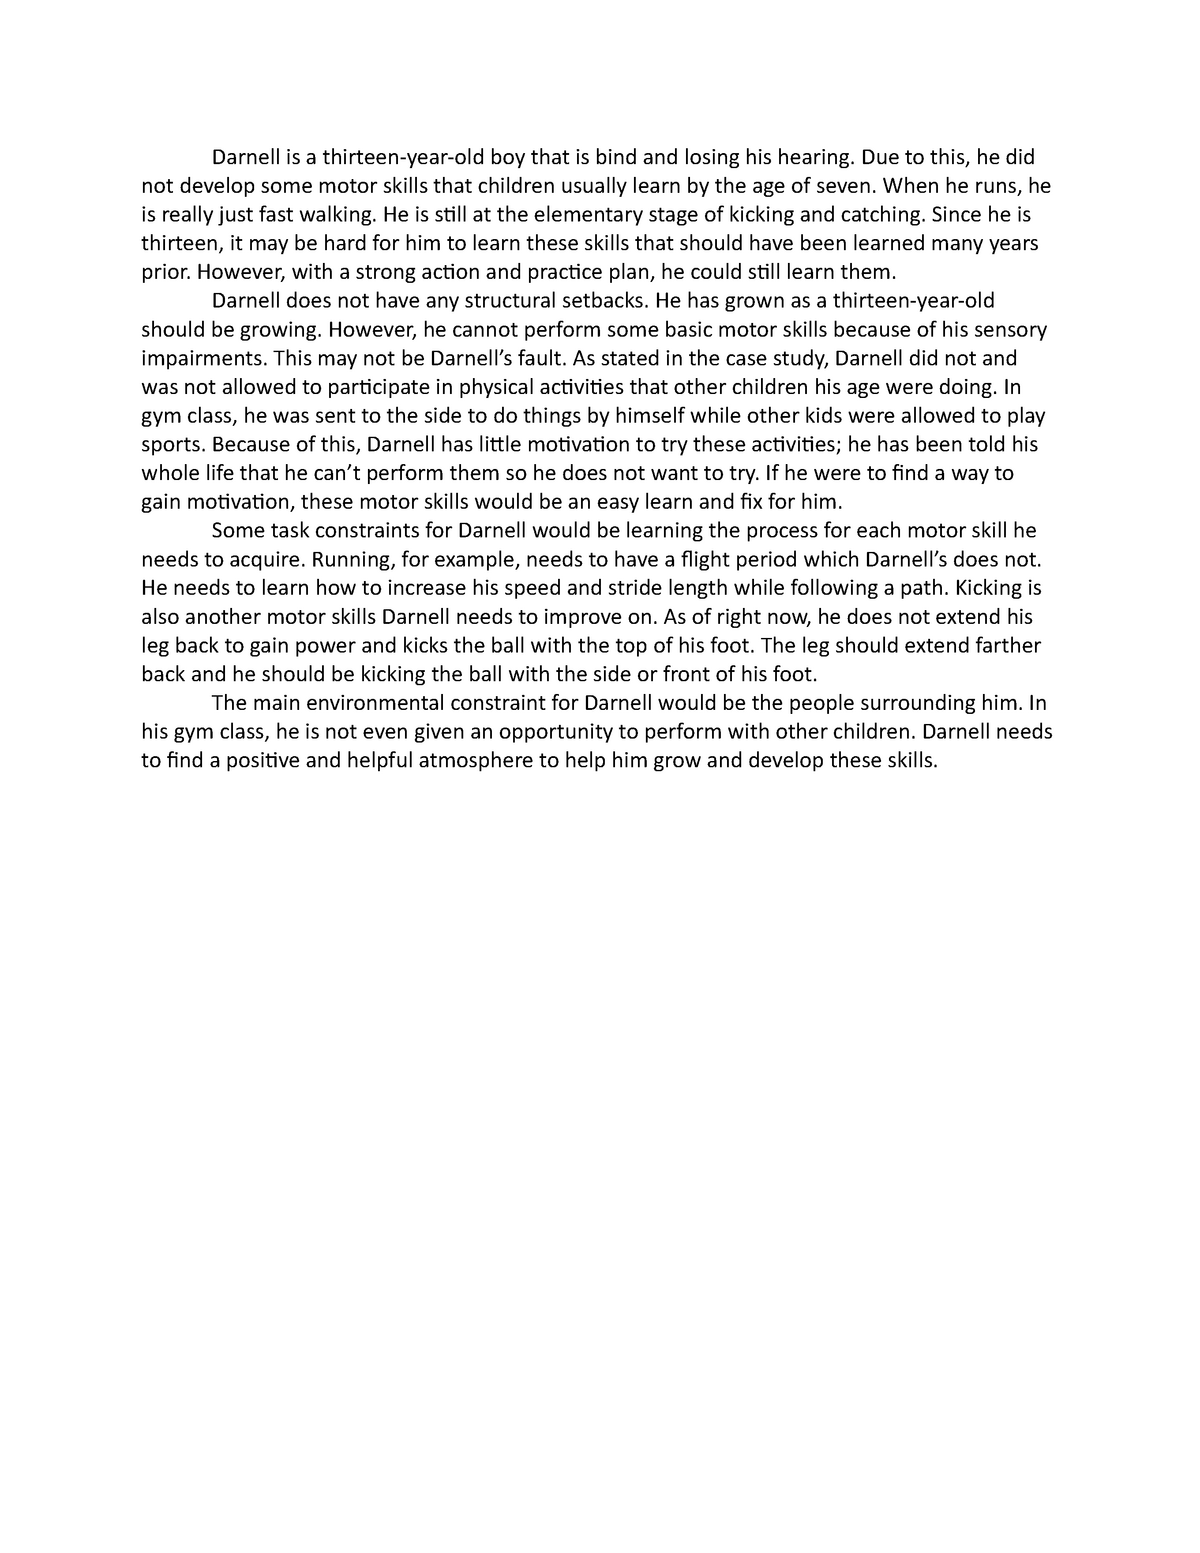 Kine case study paper - Darnell is a thirteen-year-old boy that is bind ...